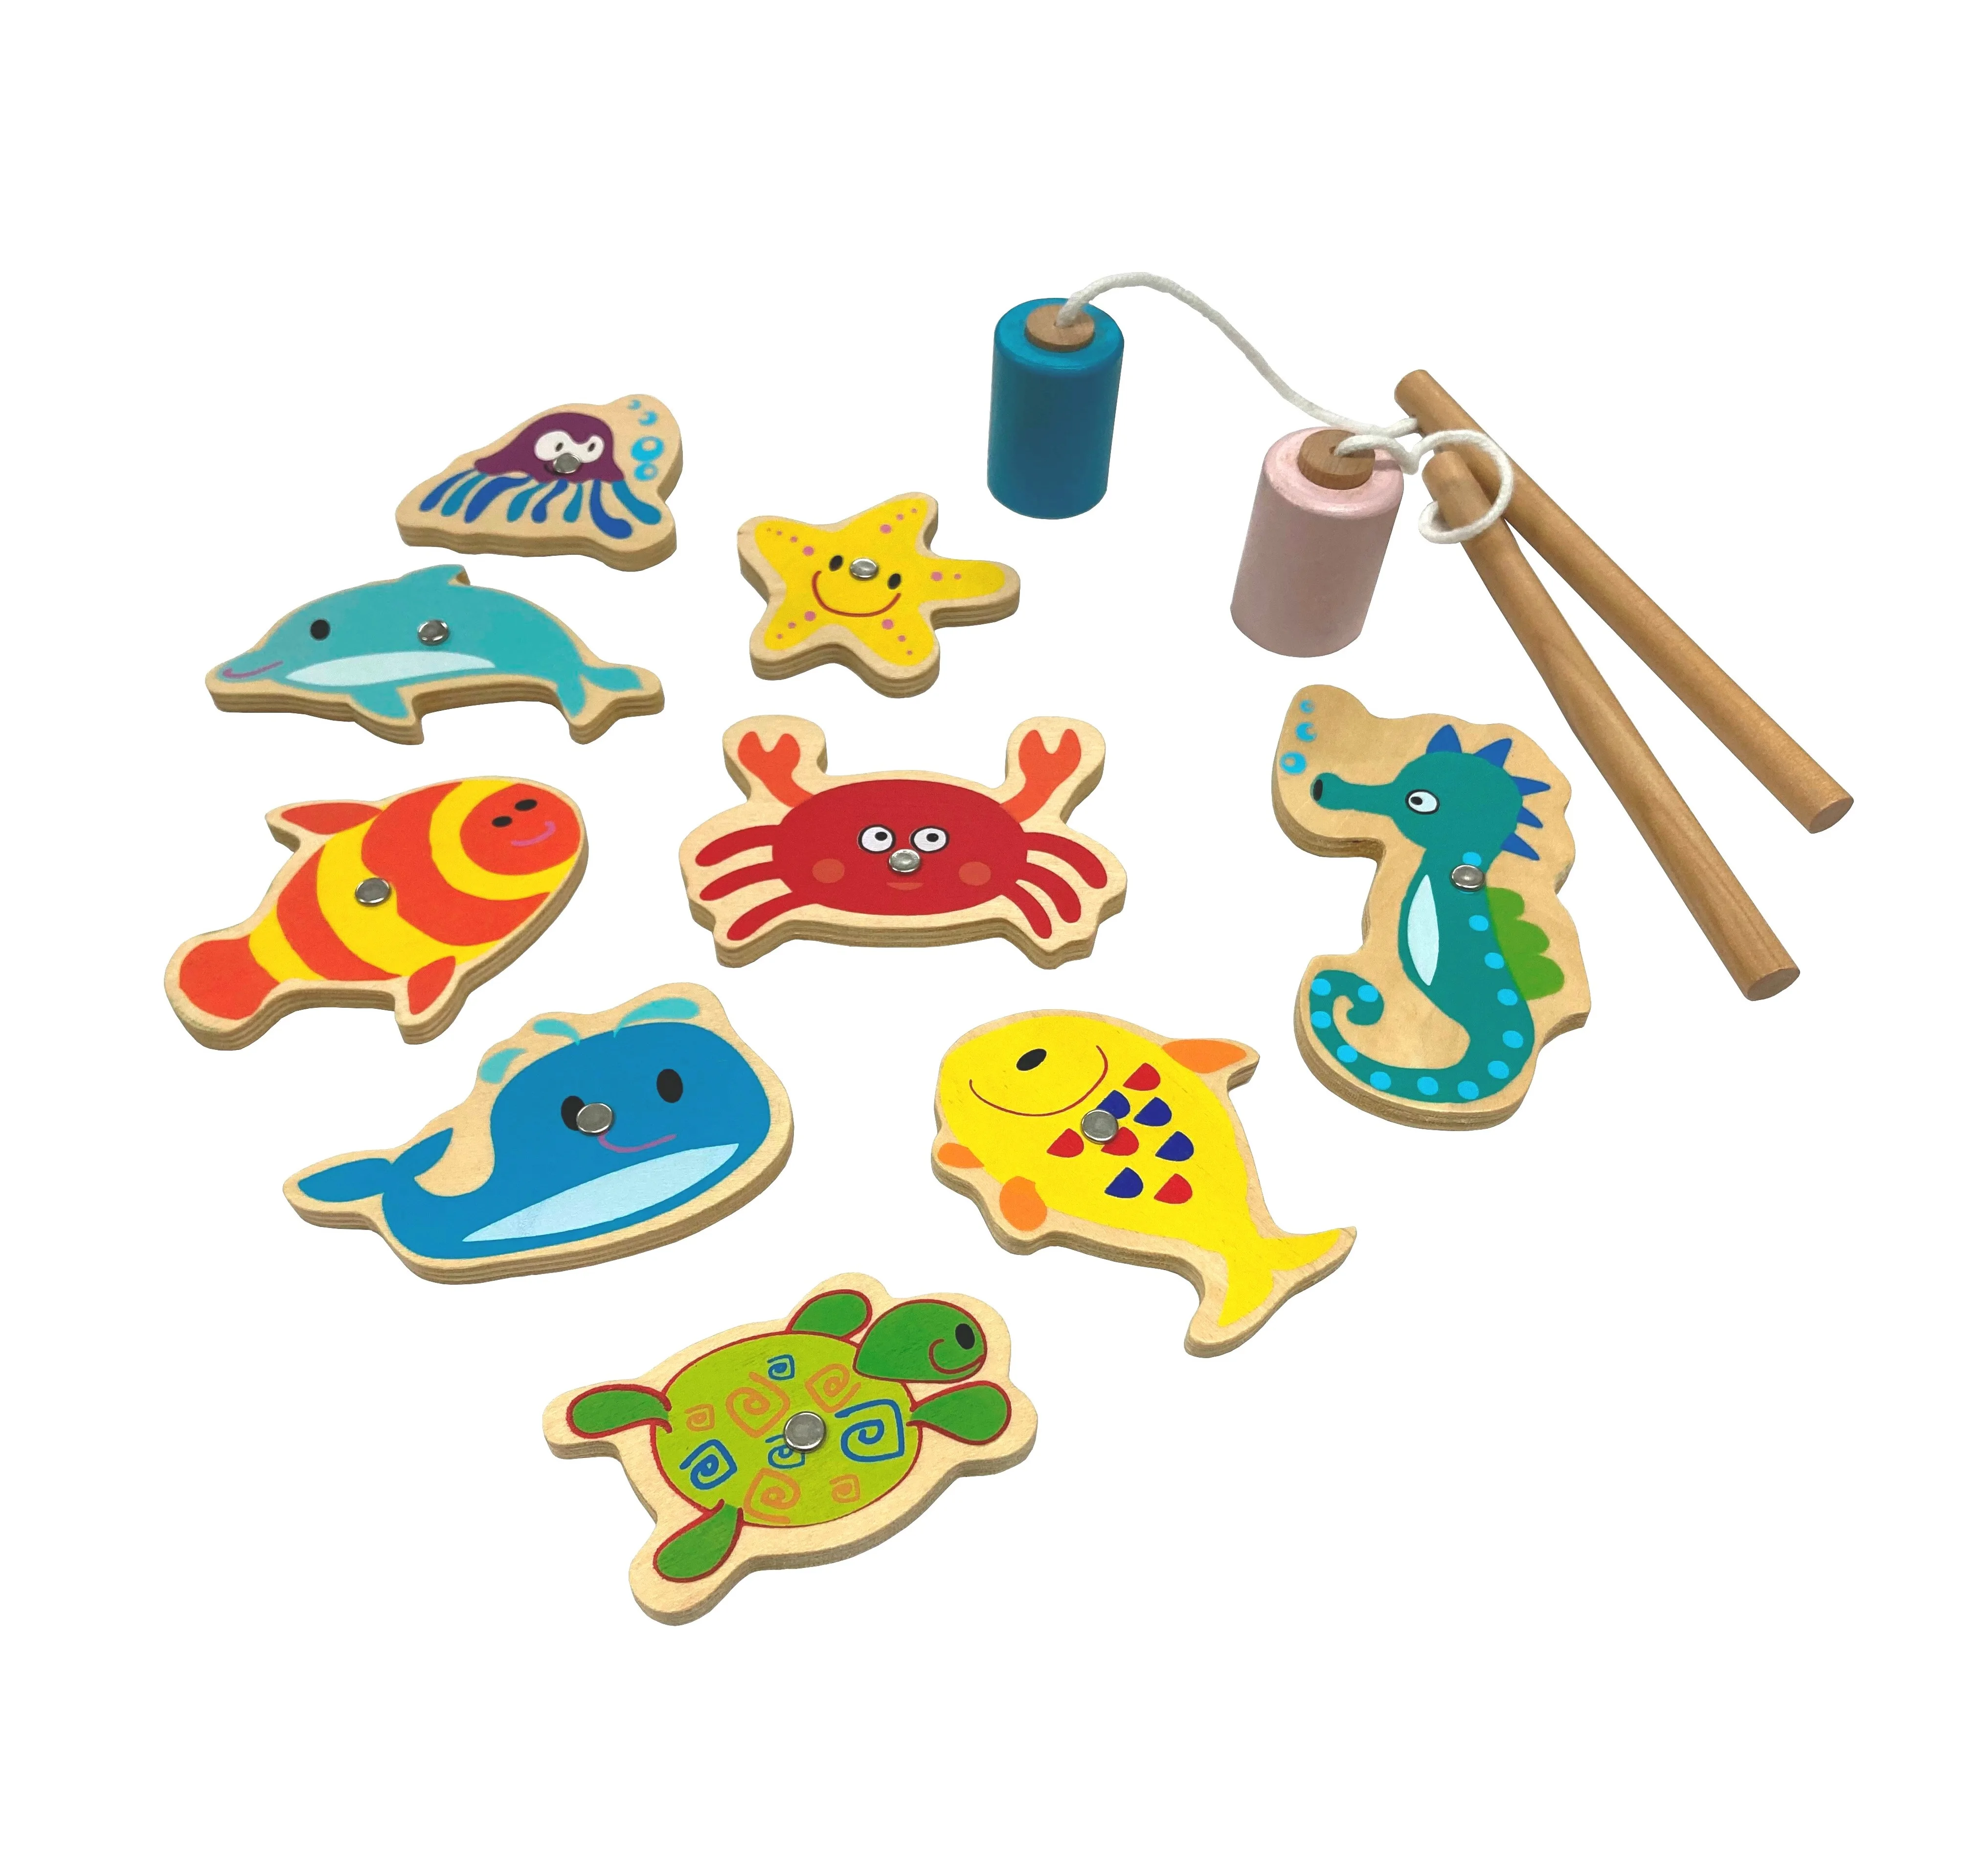 Wooden Magnetic Fishing Game for Kids Easy Learning and Physical Development